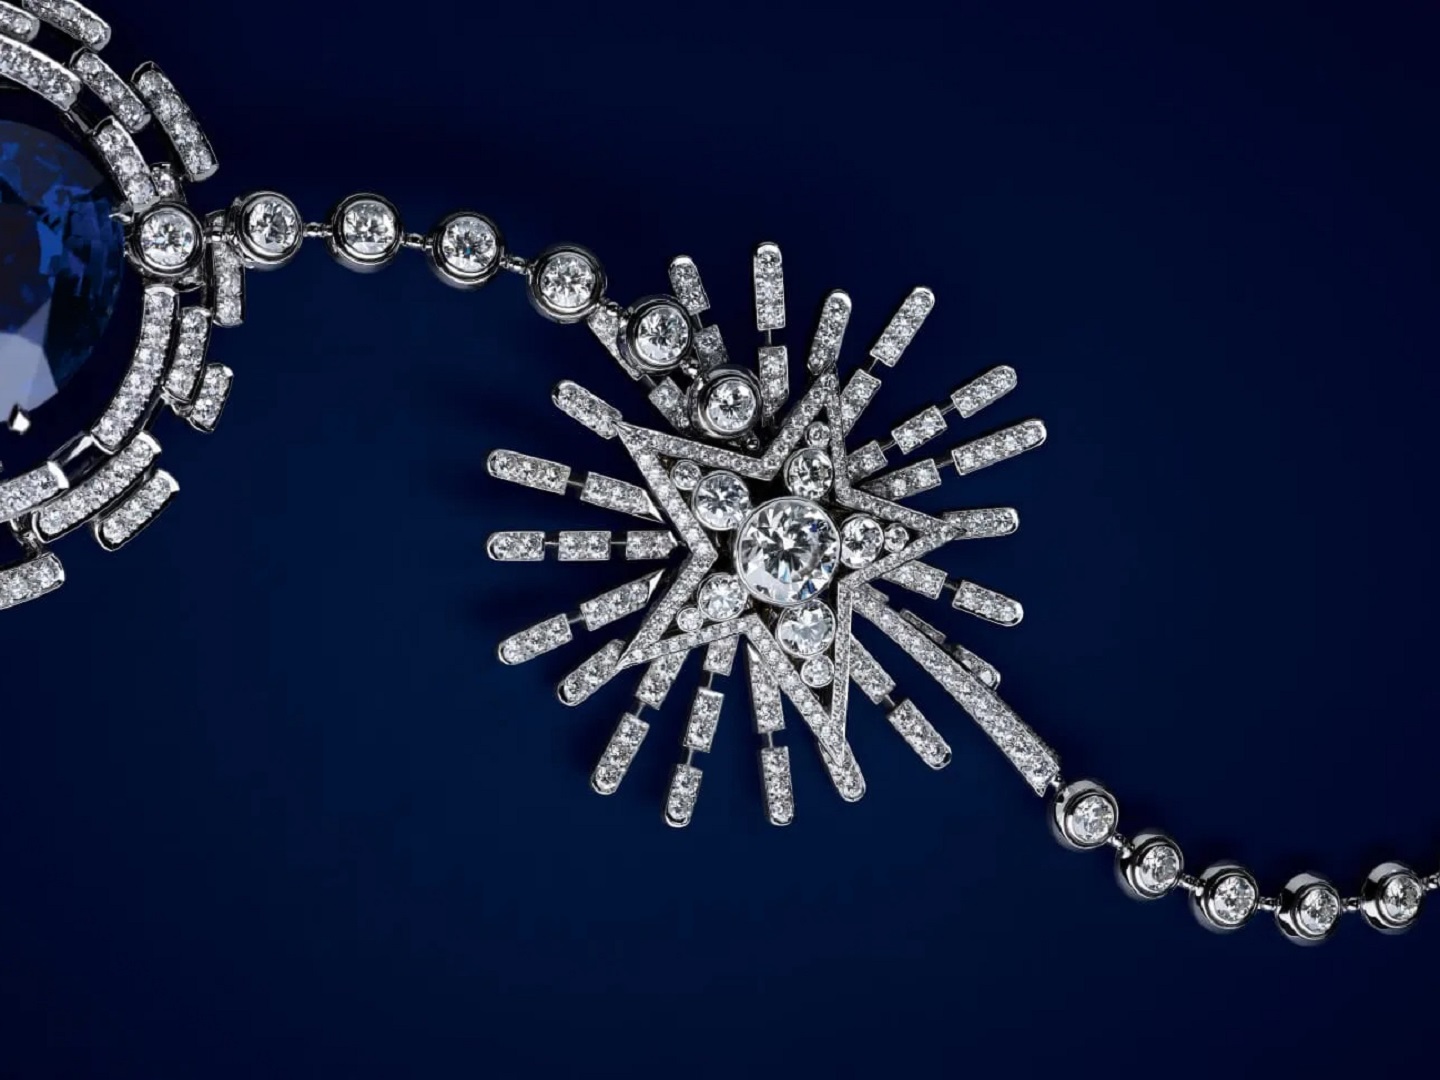 Chanel headlines Designer Jewelry, Watch, and Fashion Auction, July 3